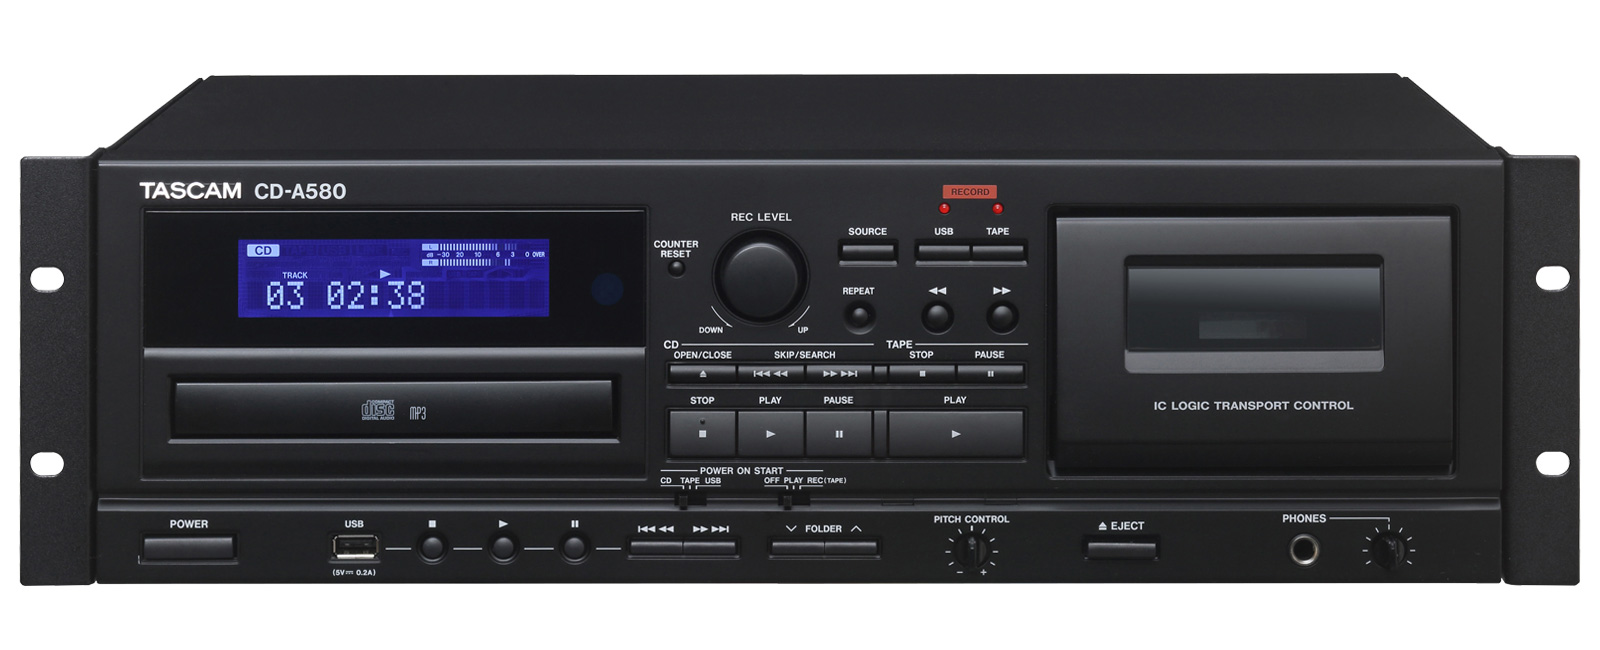 TASCAM relaunches the CD-A580 as the CD-A580 v2 Cassette Recorder/CD Player/USB Flash Drive Recorder